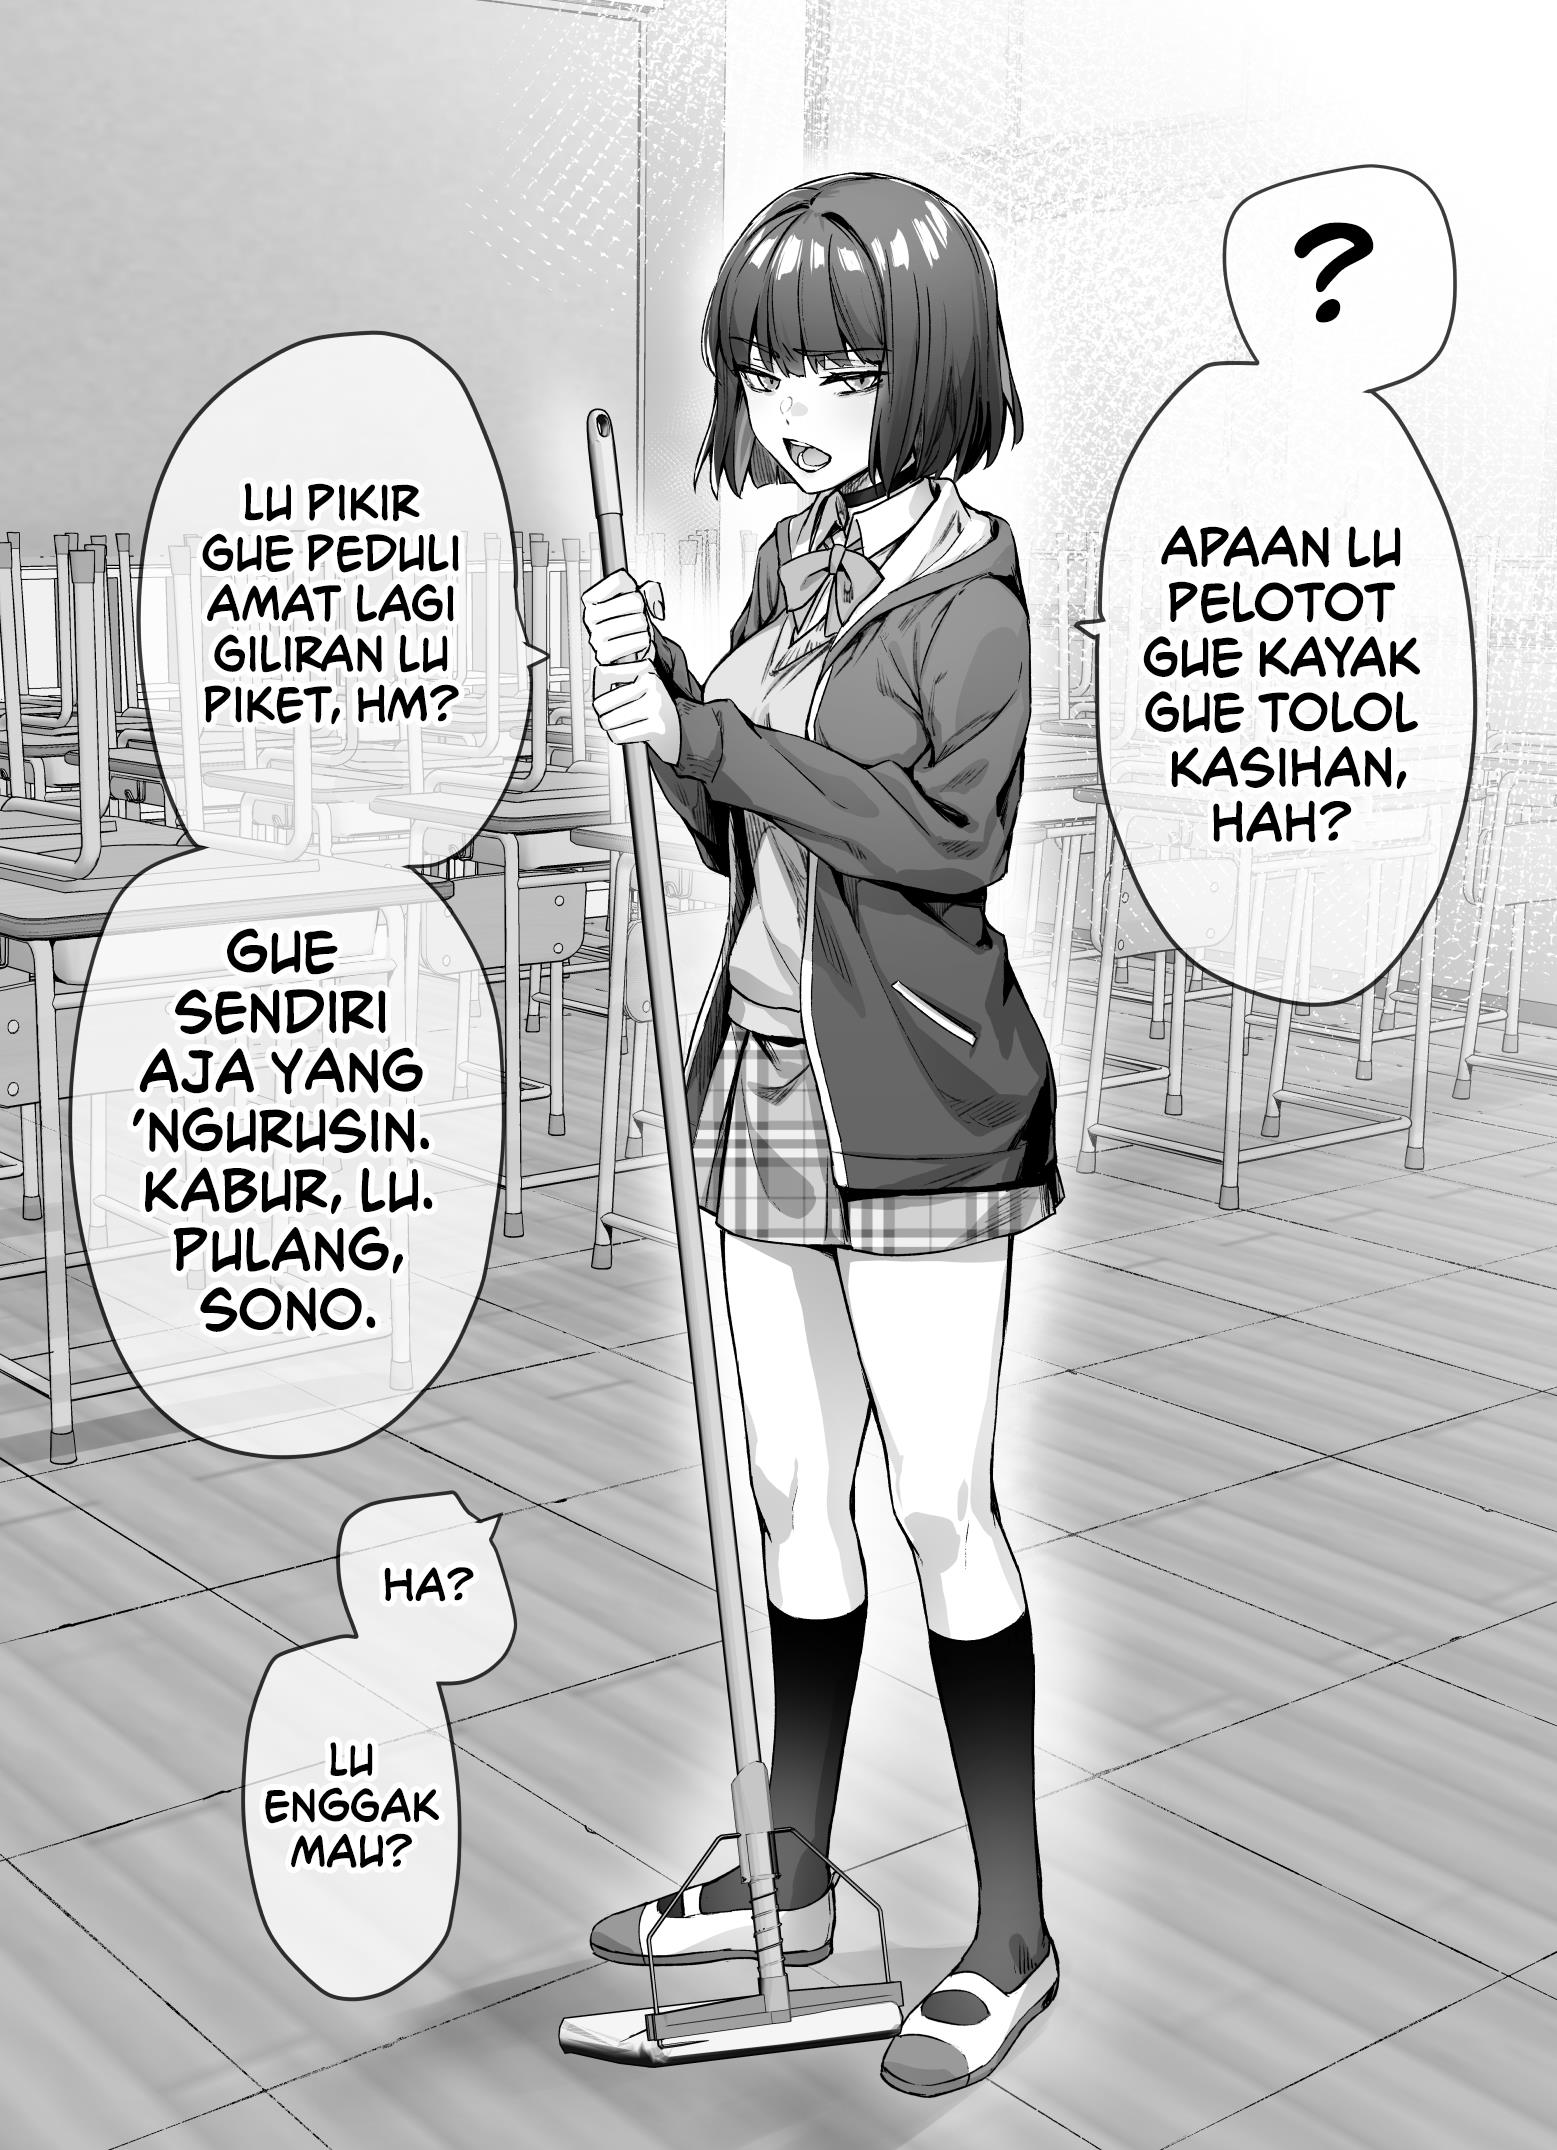 The Tsuntsuntsuntsuntsuntsun tsuntsuntsuntsuntsundere Girl Getting Less and Less Tsun Day by Day Chapter 5.1